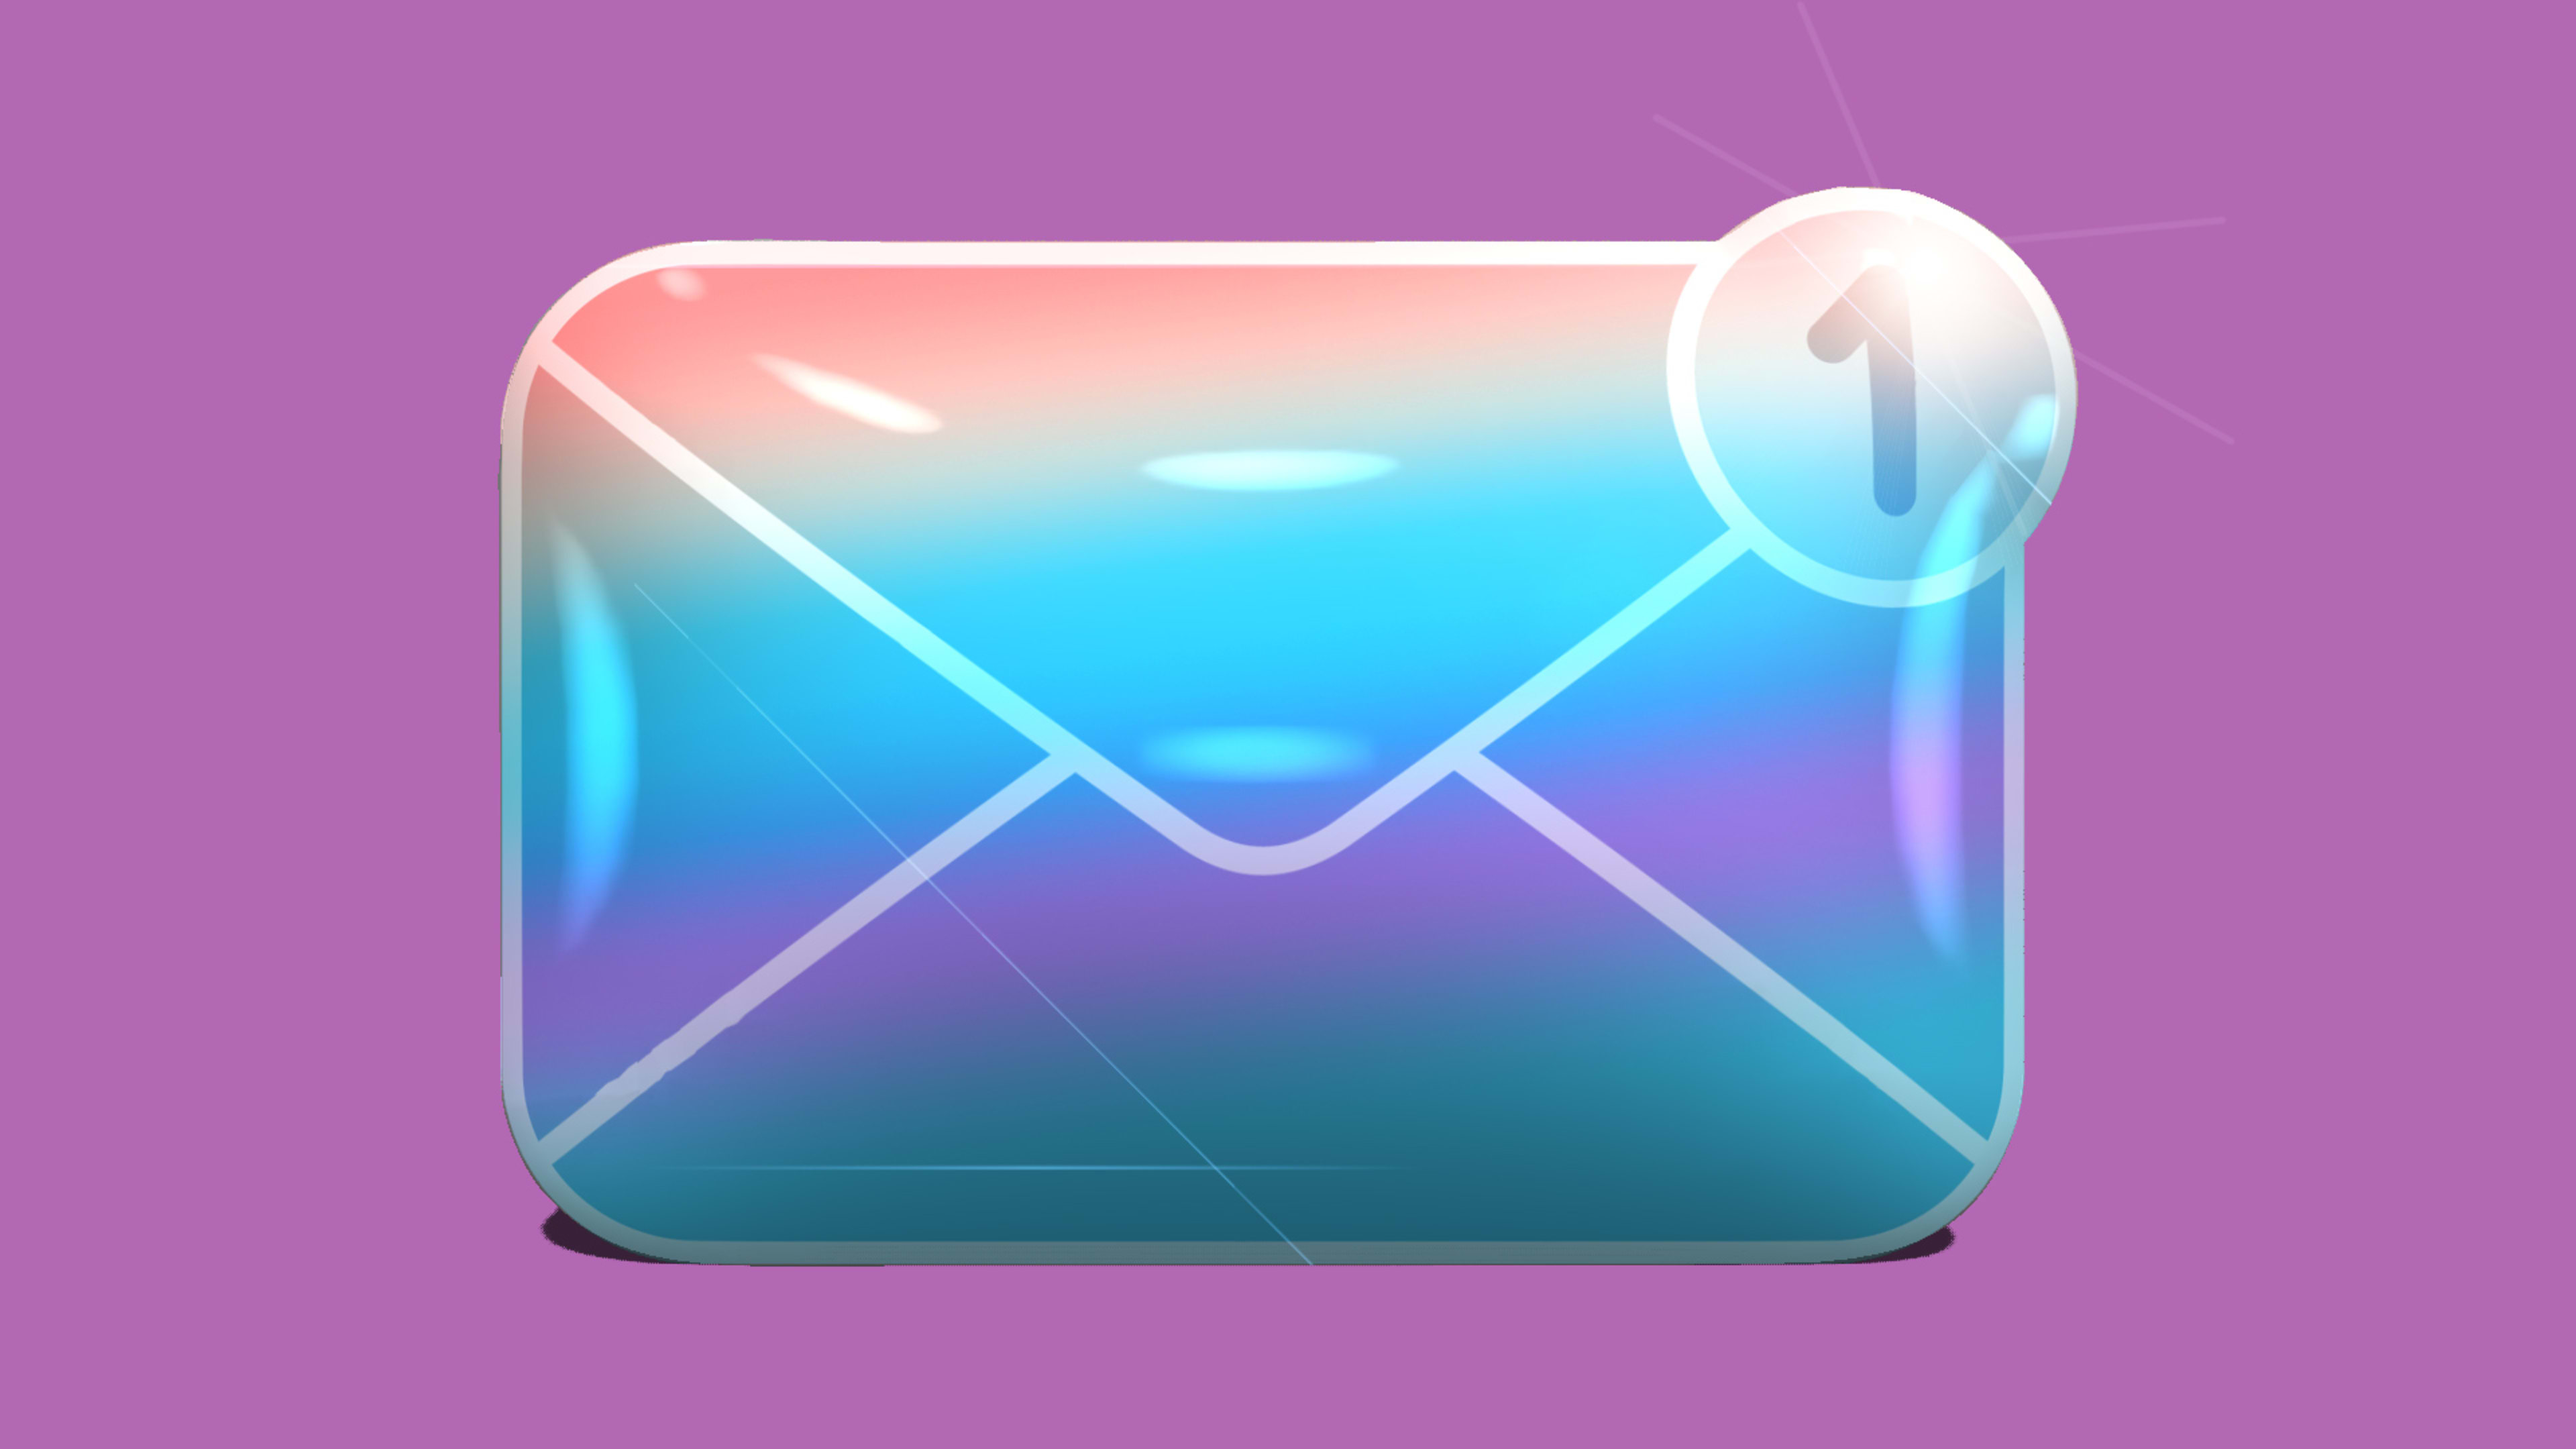 Why we’re entering the golden age of email